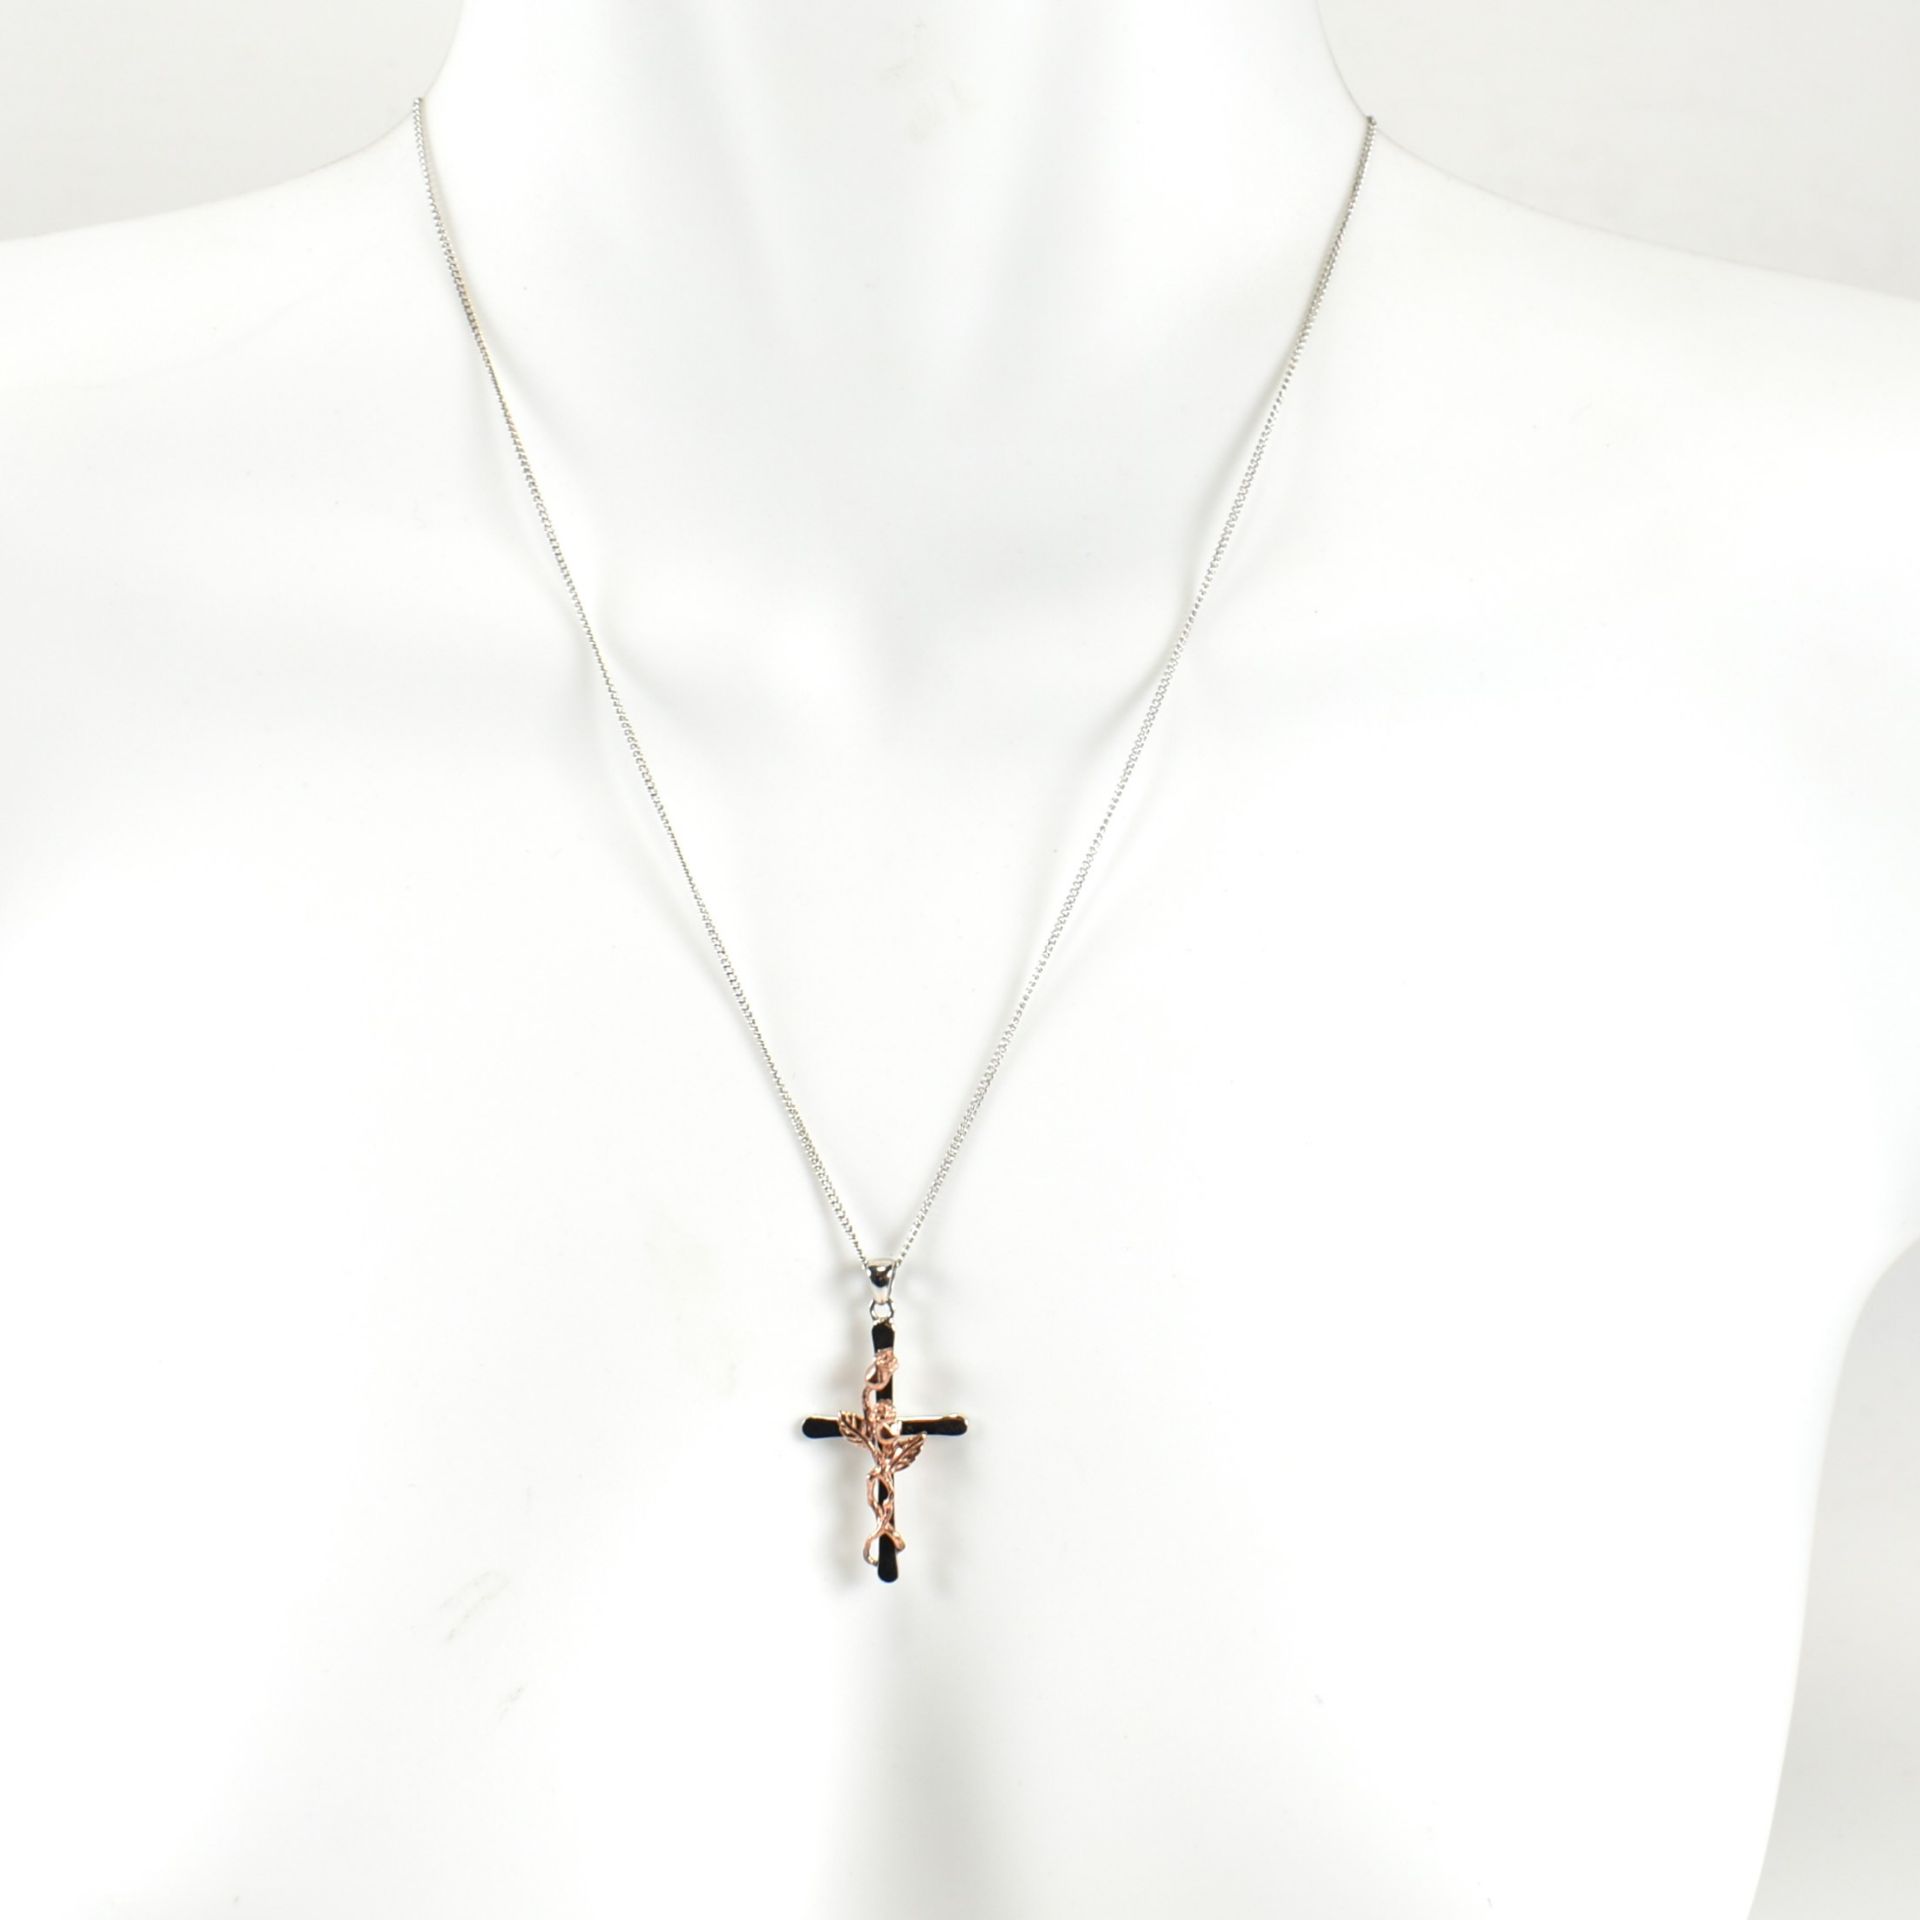 HALLMARKED SILVER & ROSE GOLD CLOGAU CROSS PENDANT NECKLACE - Image 5 of 5